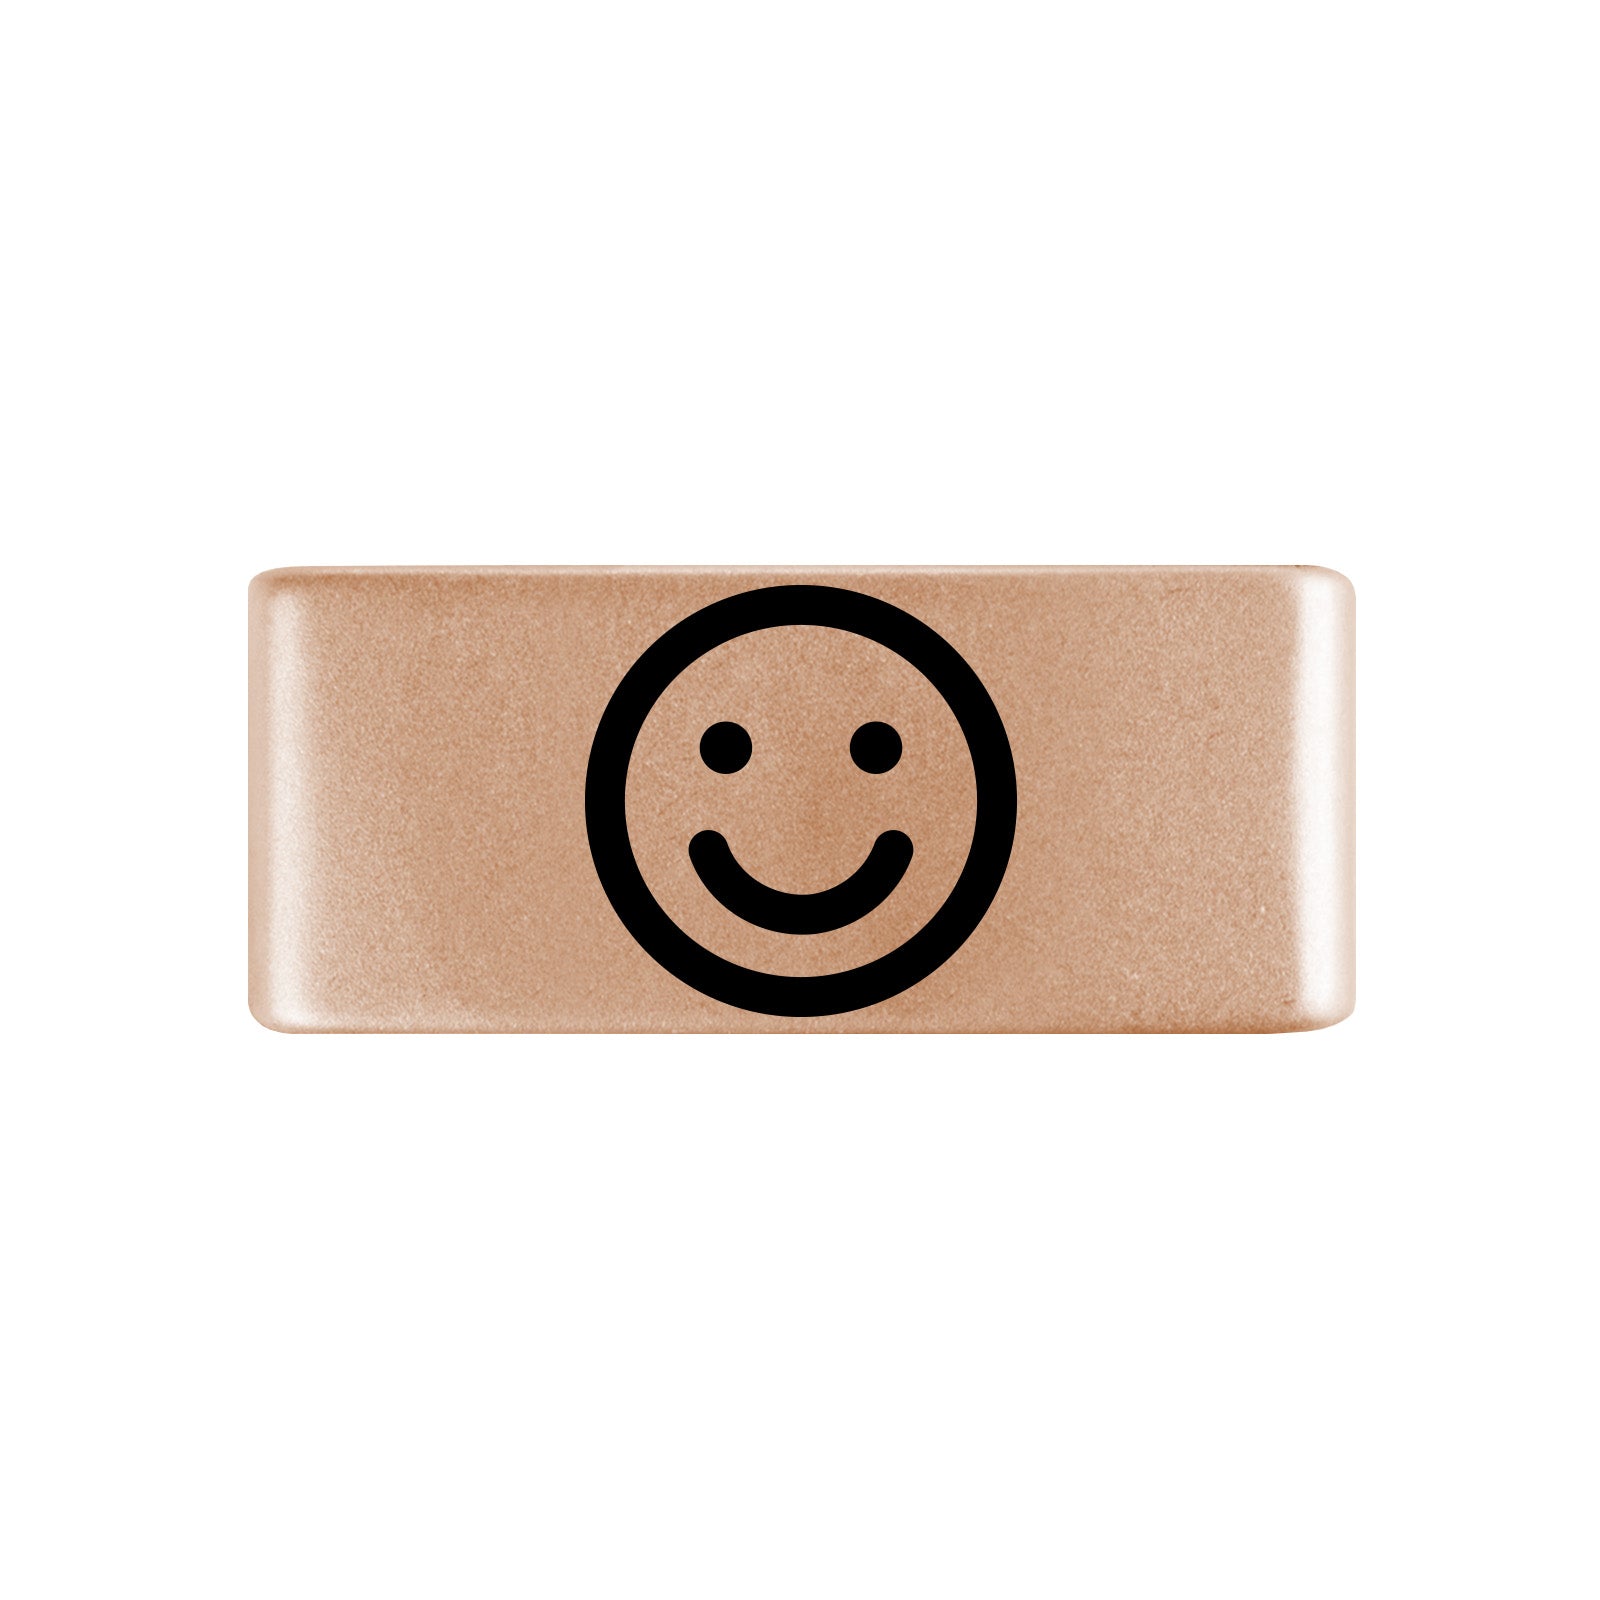 Smiley Face Badge Badge 13mm - ROAD iD